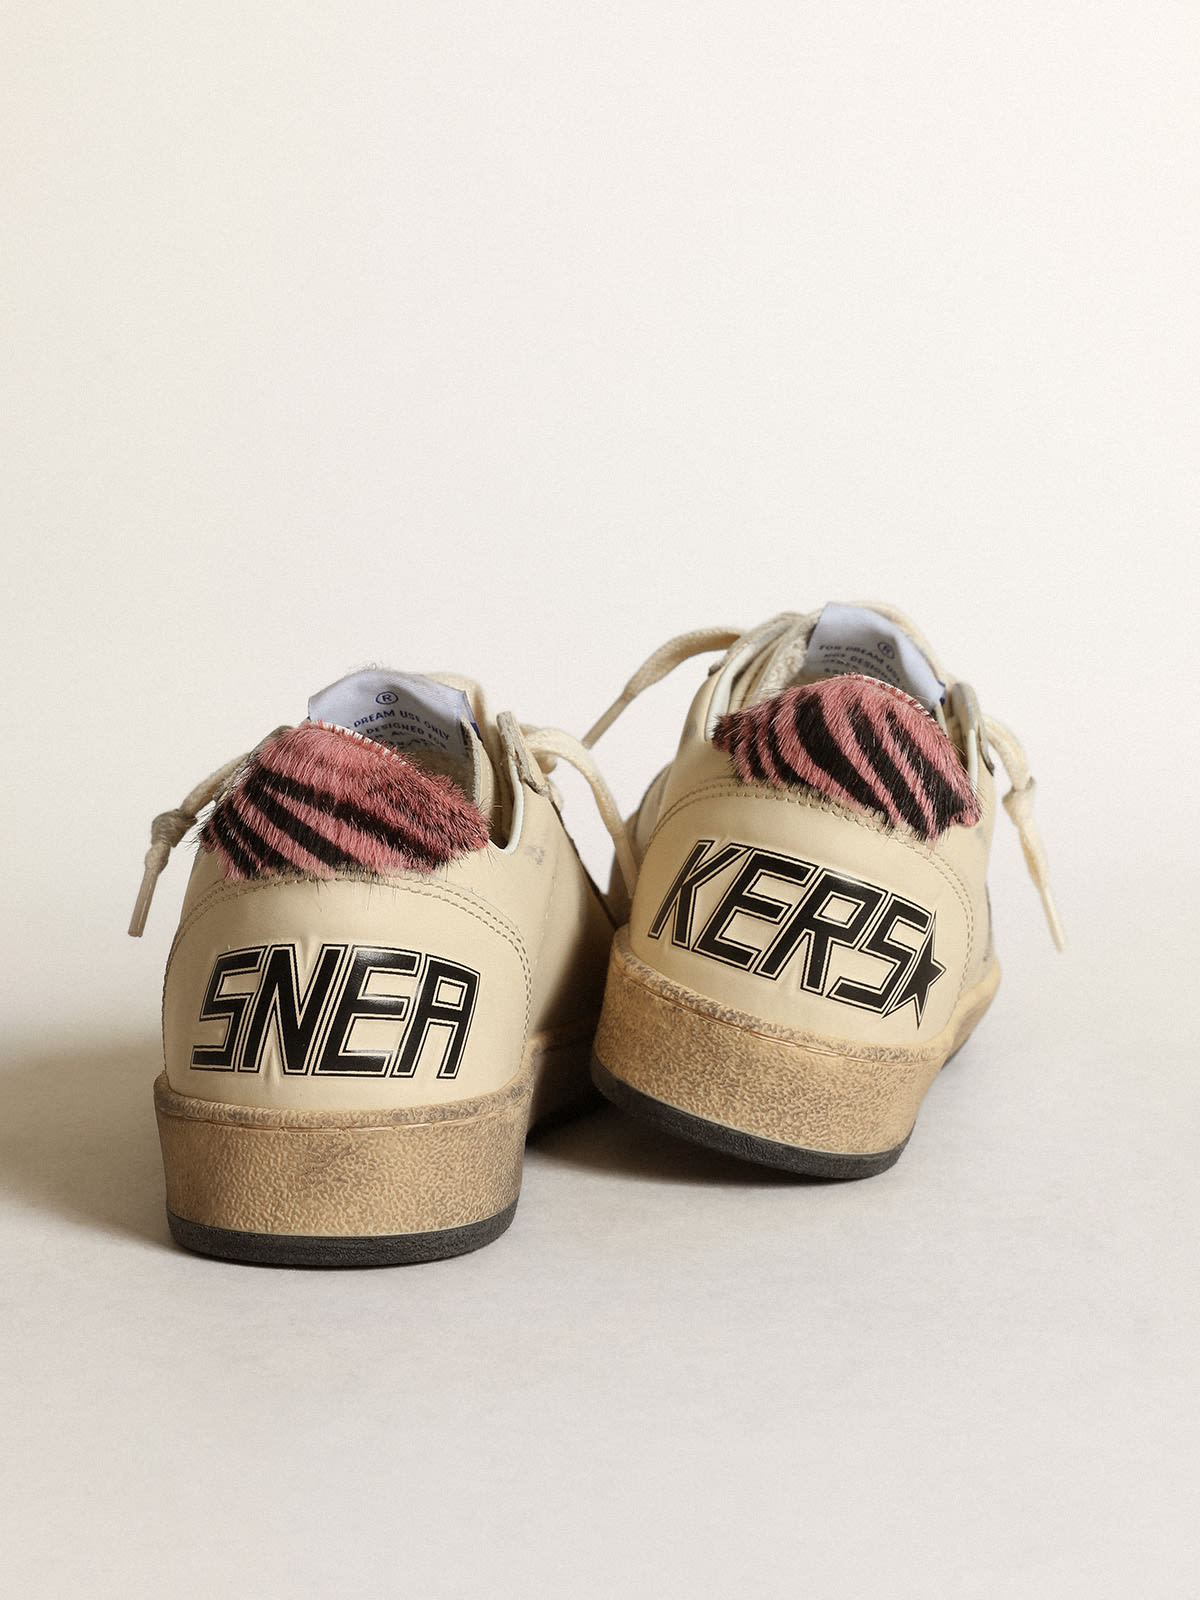 Golden Goose - Ball Star LTD sneakers in ivory leather with pink and black zebra-print pony skin heel tab in 